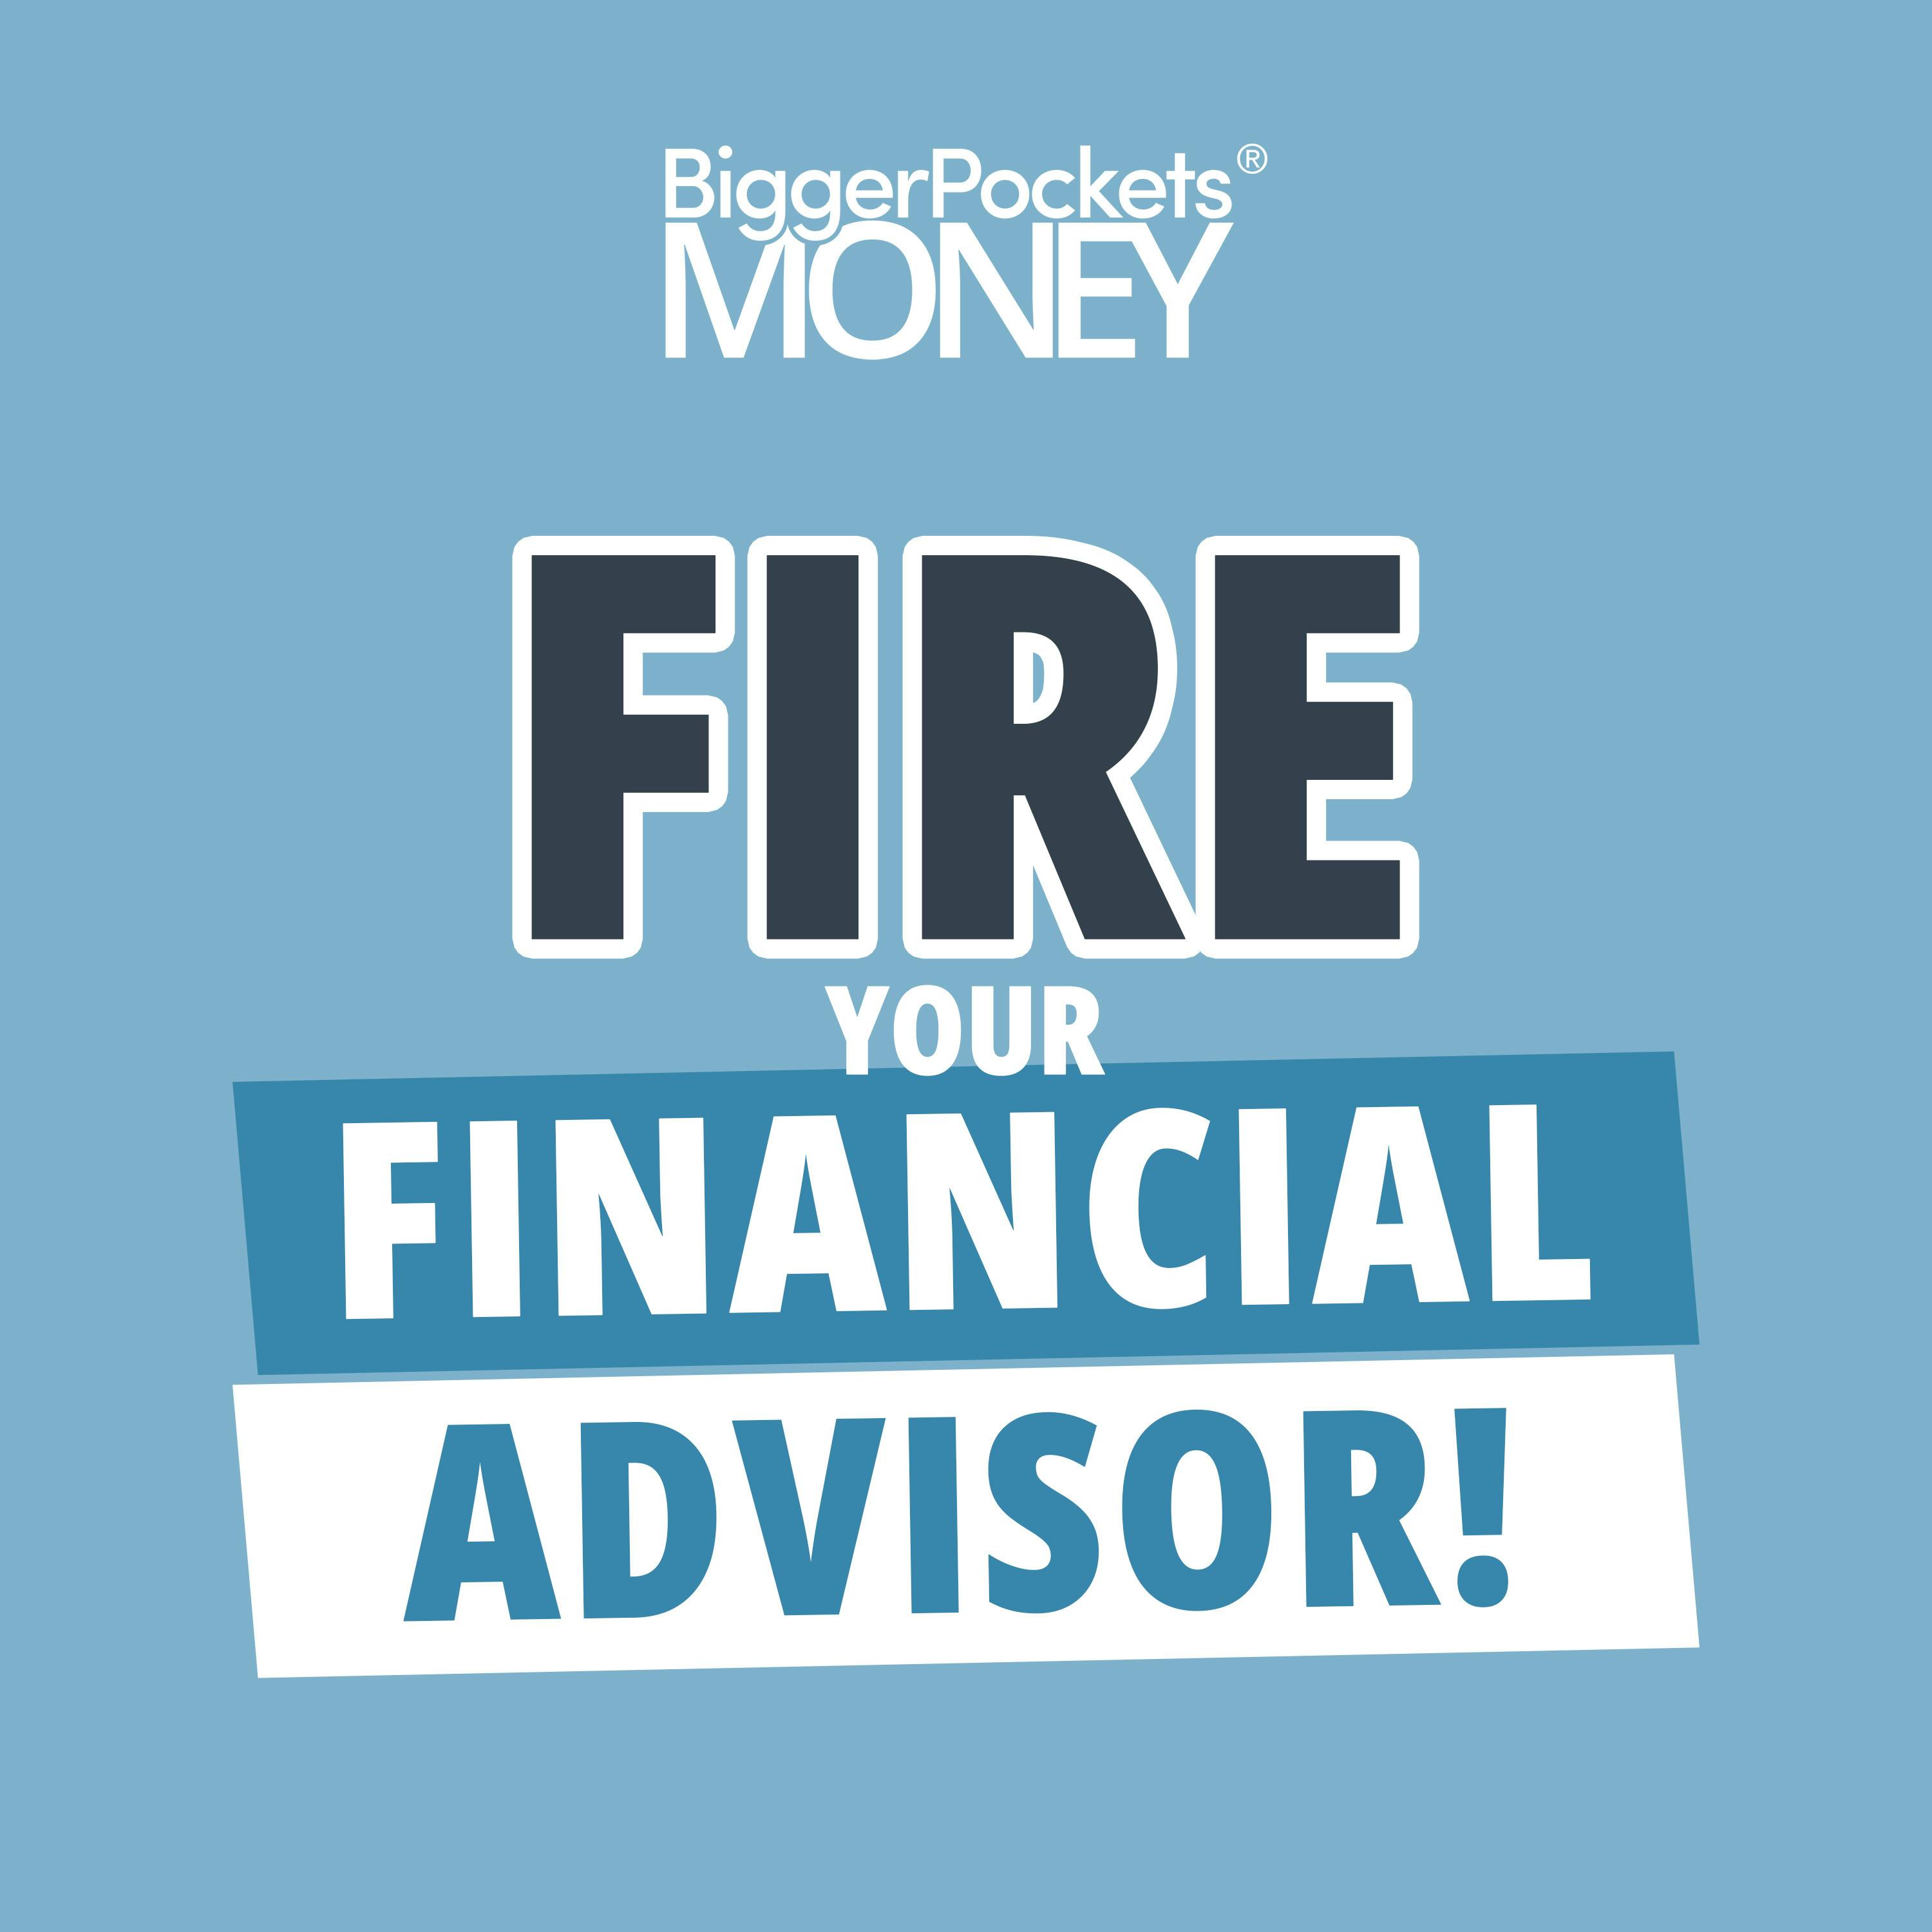 444: Financial Advisor Fees, LLCs, and Stock Investing 101 | Ask Mindy and Scott